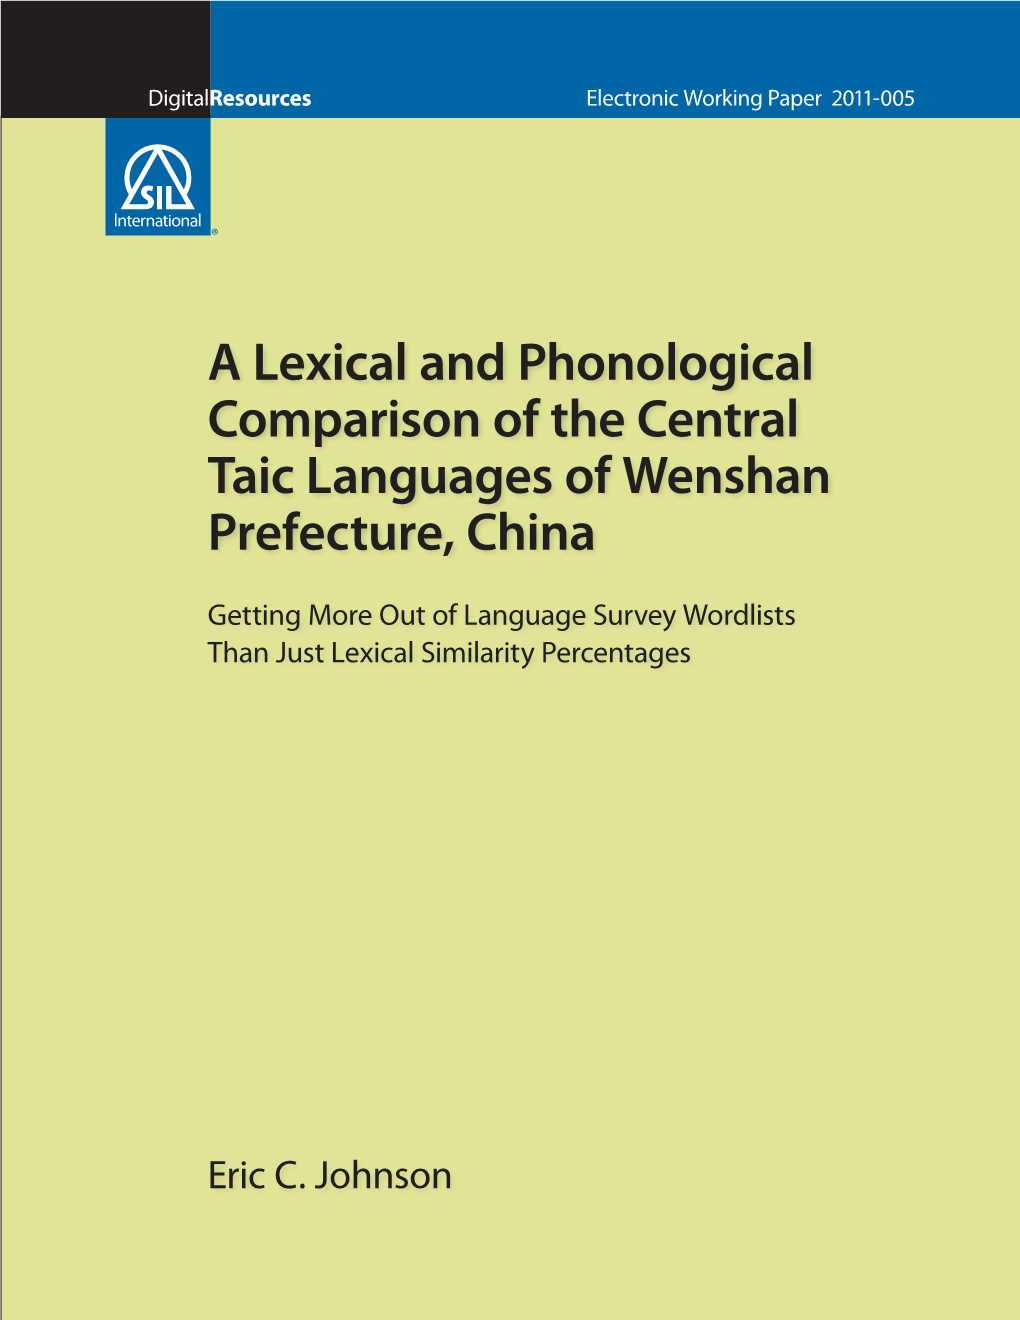 A Lexical and Phonological Comparison of the Central Taic Languages of Wenshan Prefecture, China